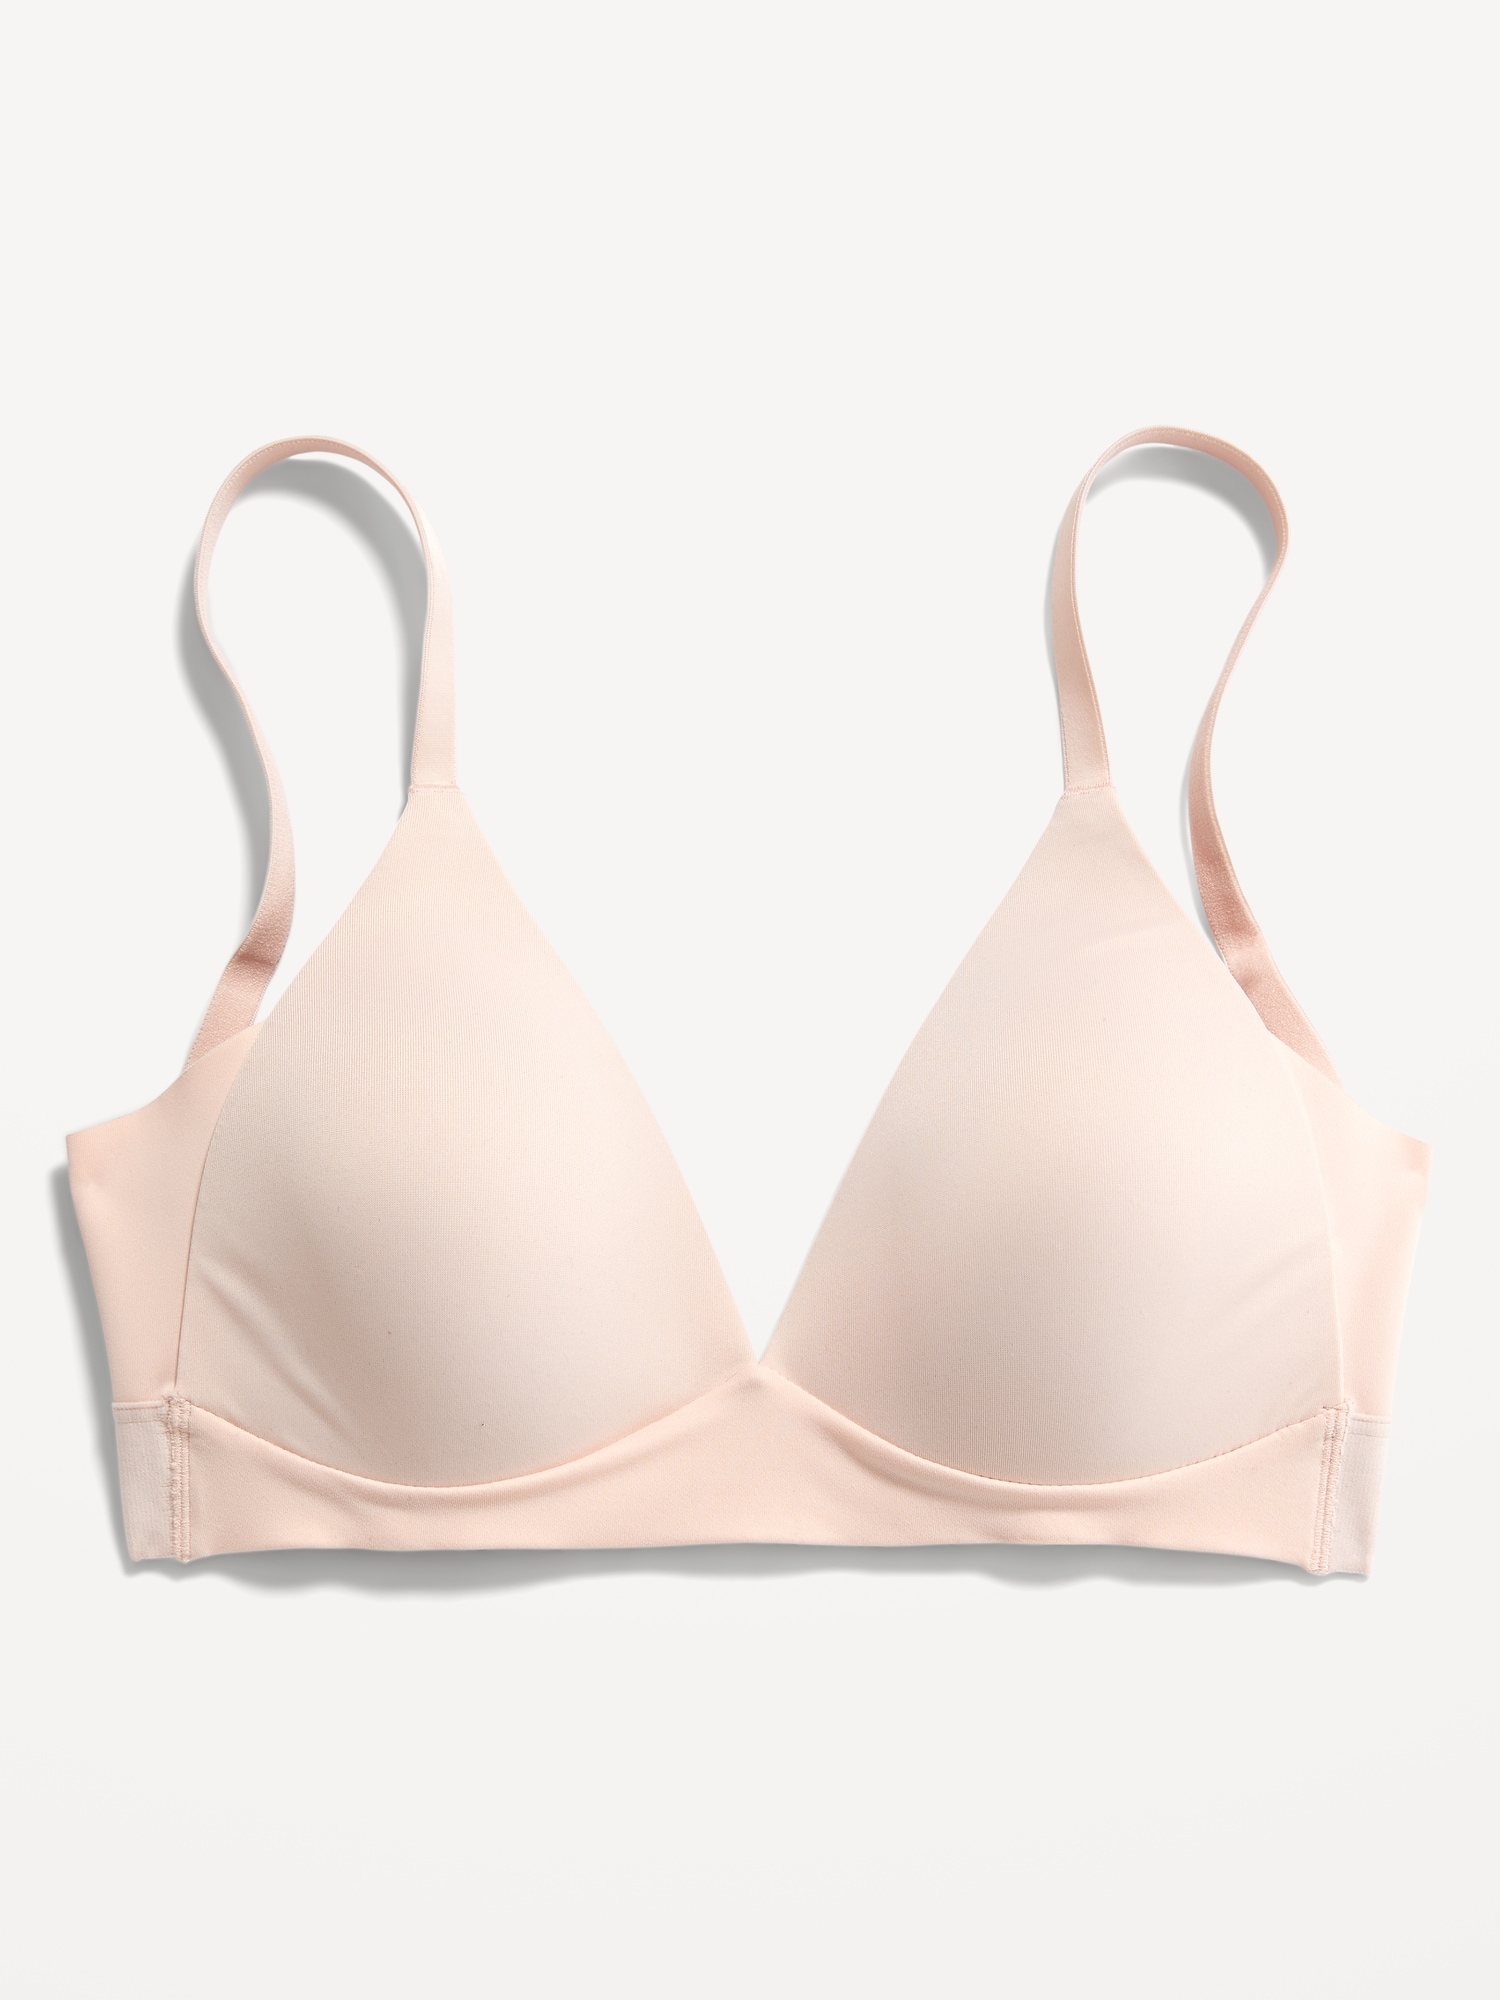 Your Life After 25: Bra Shopping Made Easy: Aerie Shop Bra Guide - Your  Life After 25